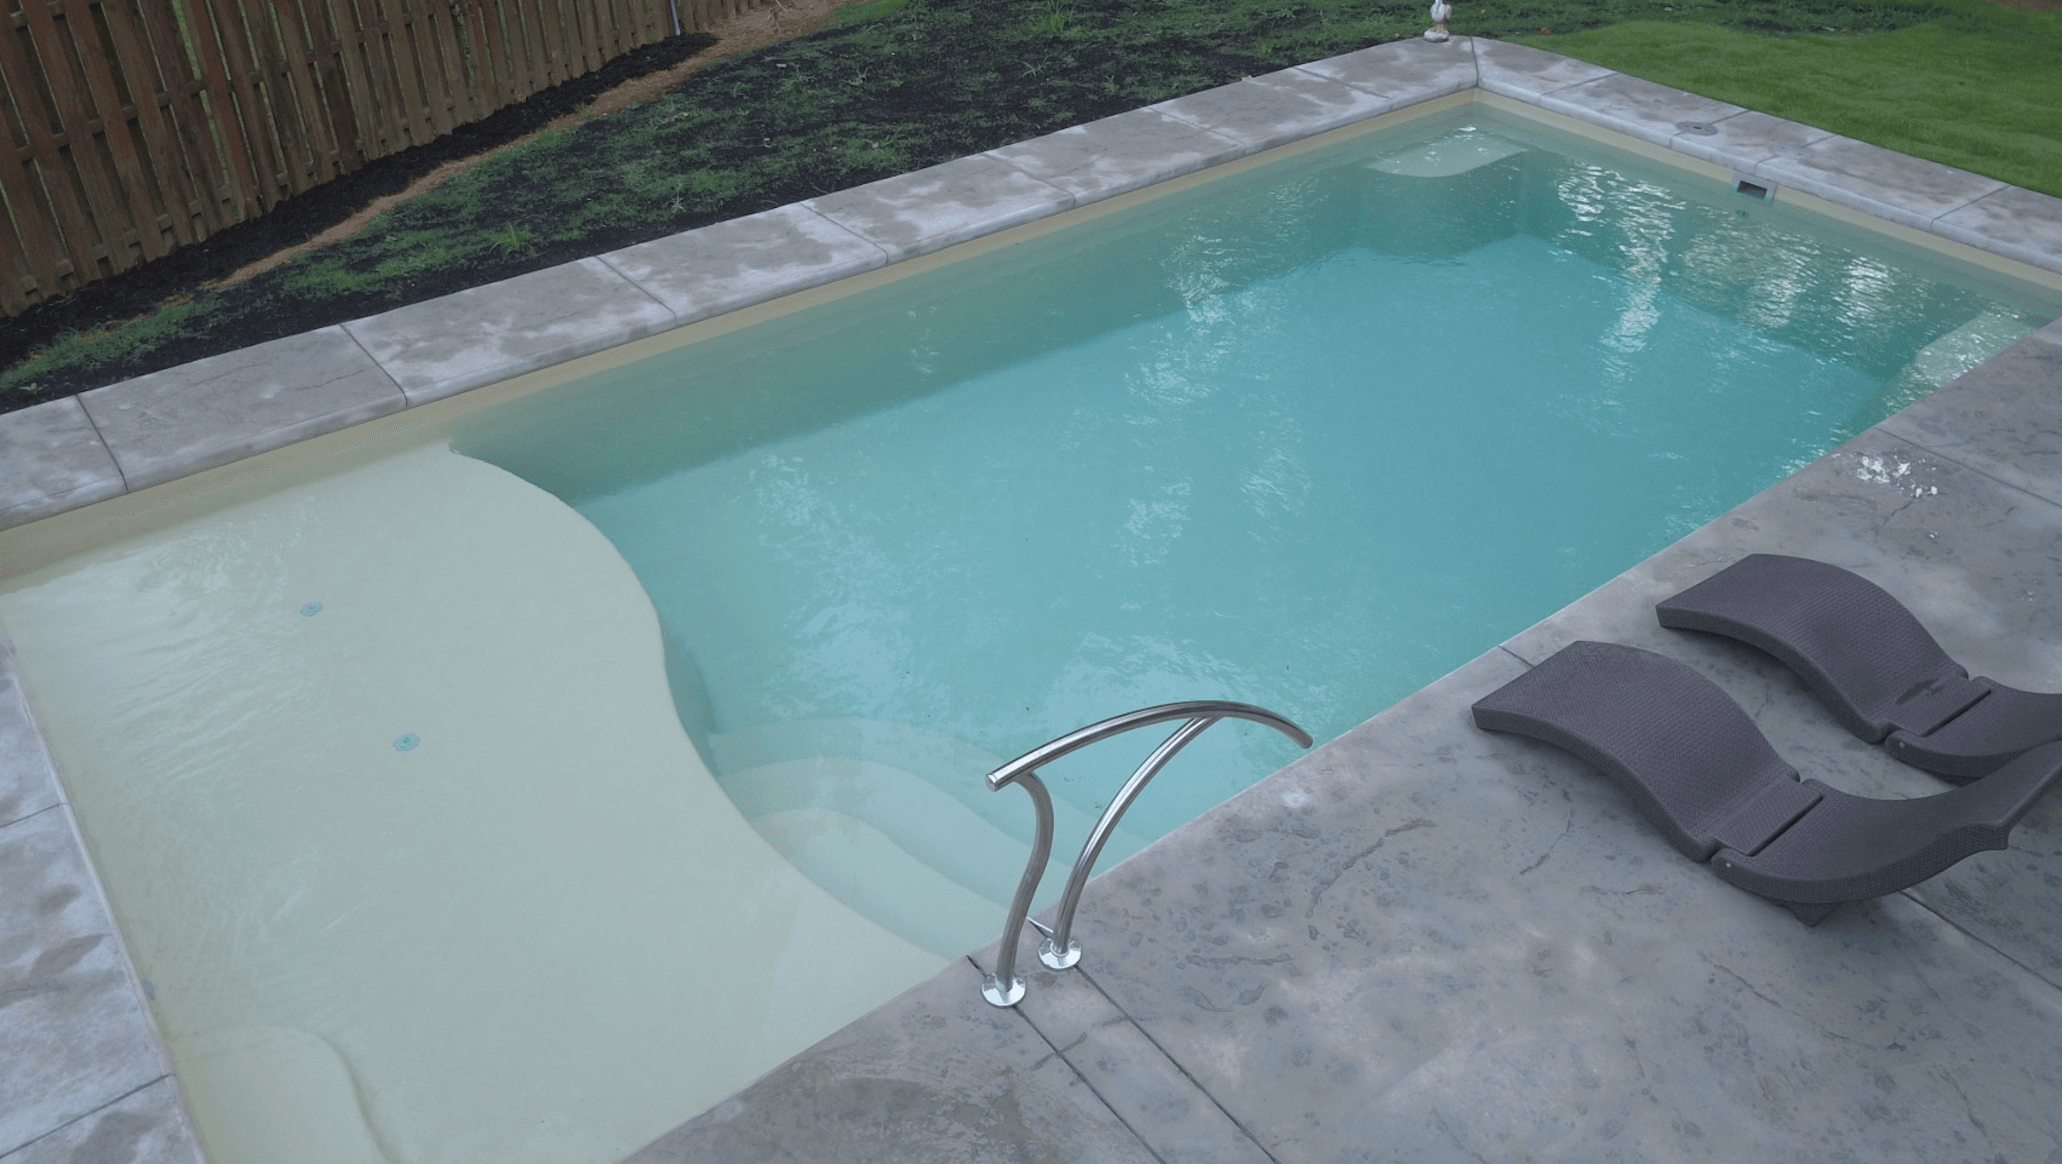 What Can You Expect From a Fiberglass Pool Kit?